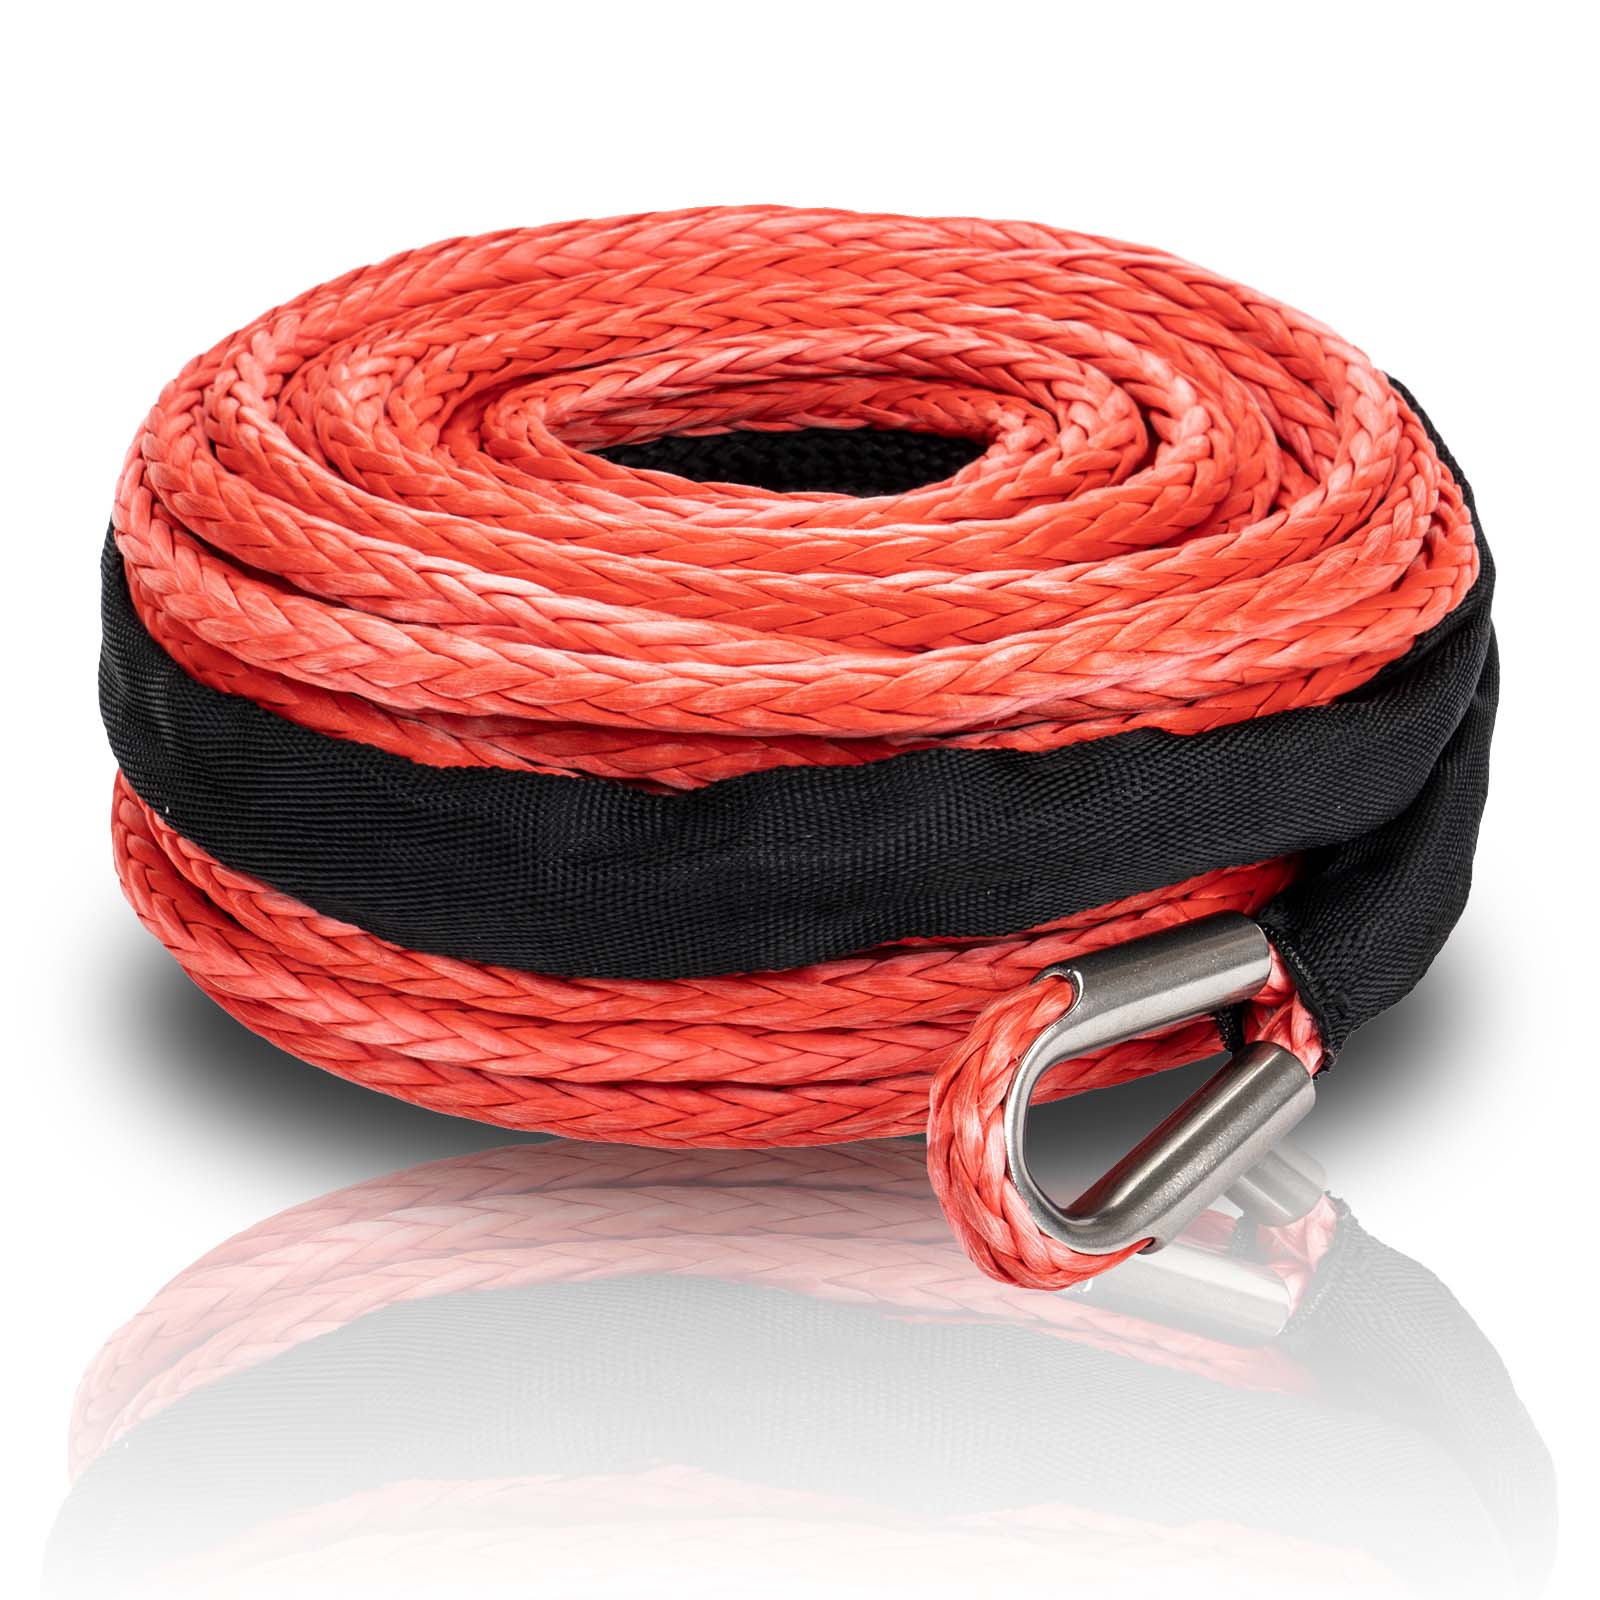 OPENROAD Synthetic Winch Rope, 3/8" x 85'-18000 LBs Winch Line Rope Replacement with Protective Sleeve/Rope Winch Hook  OPENROAD RED  